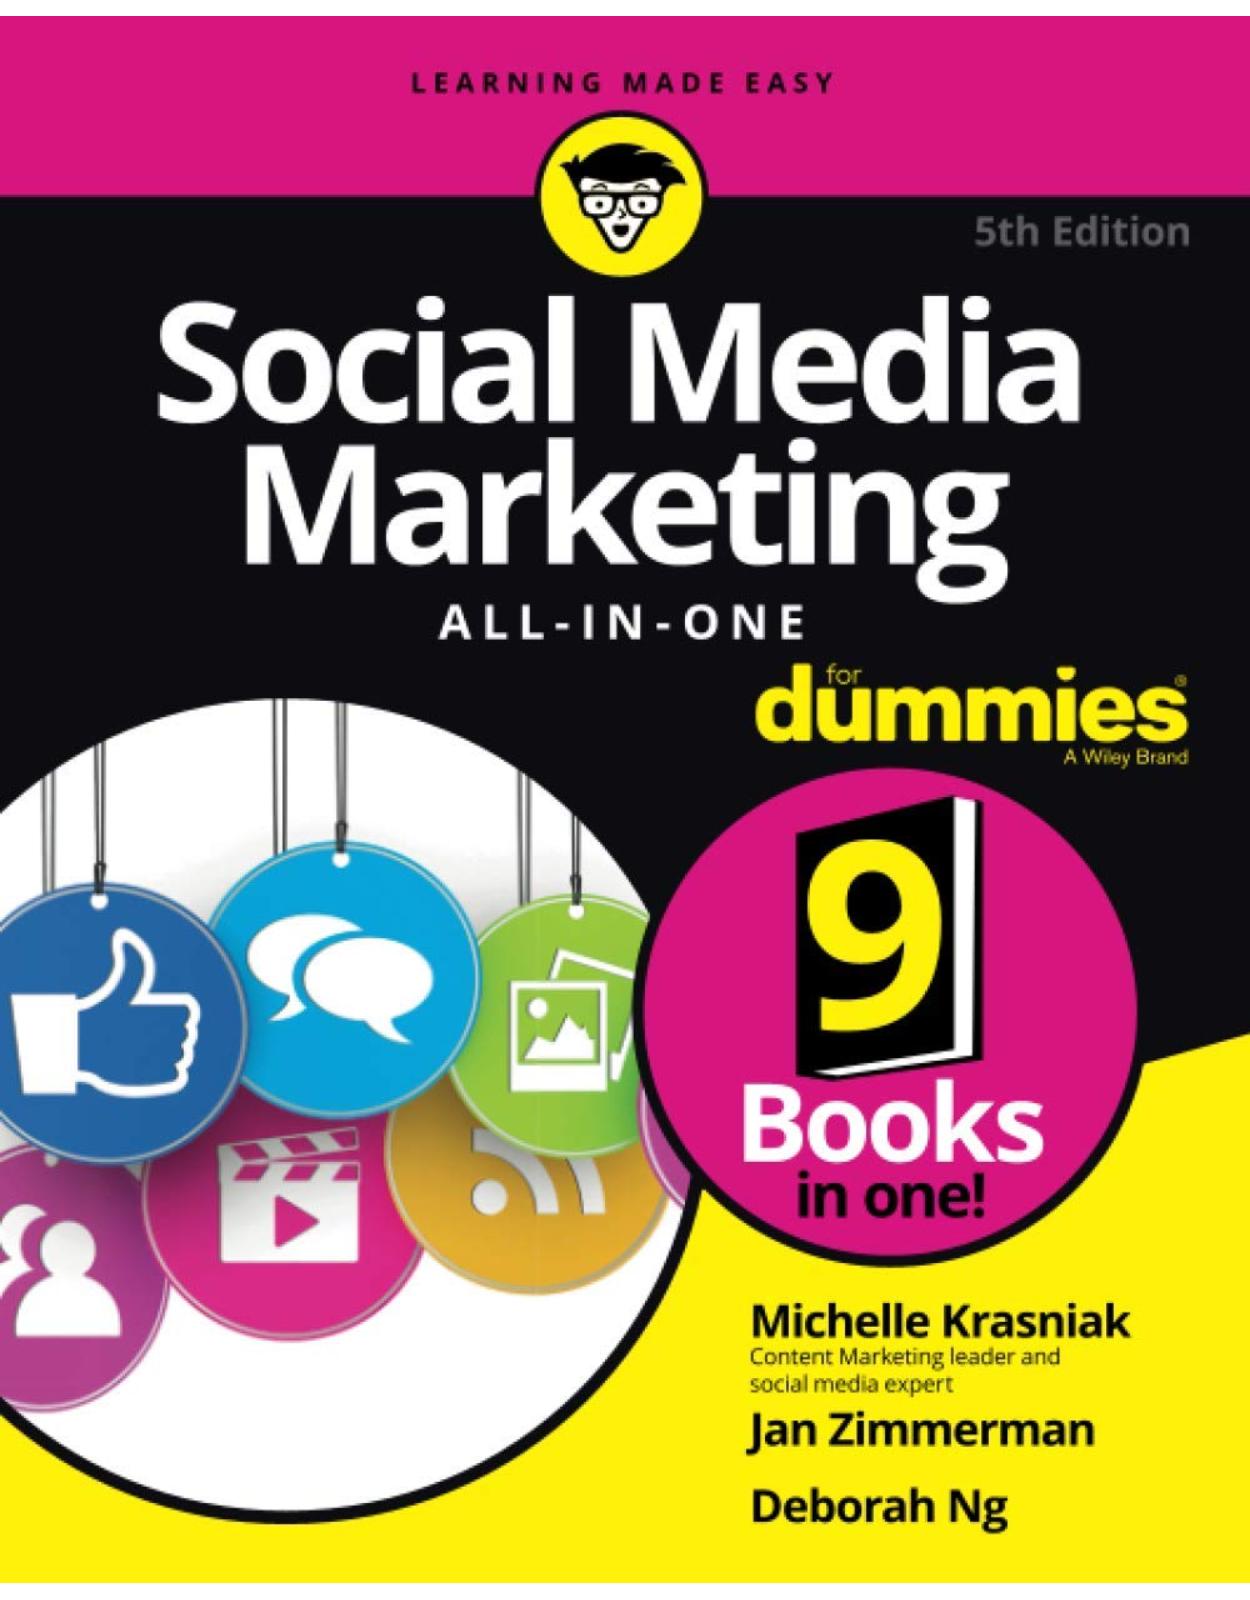 Social Media Marketing All-in-One For Dummies, 5th Edition